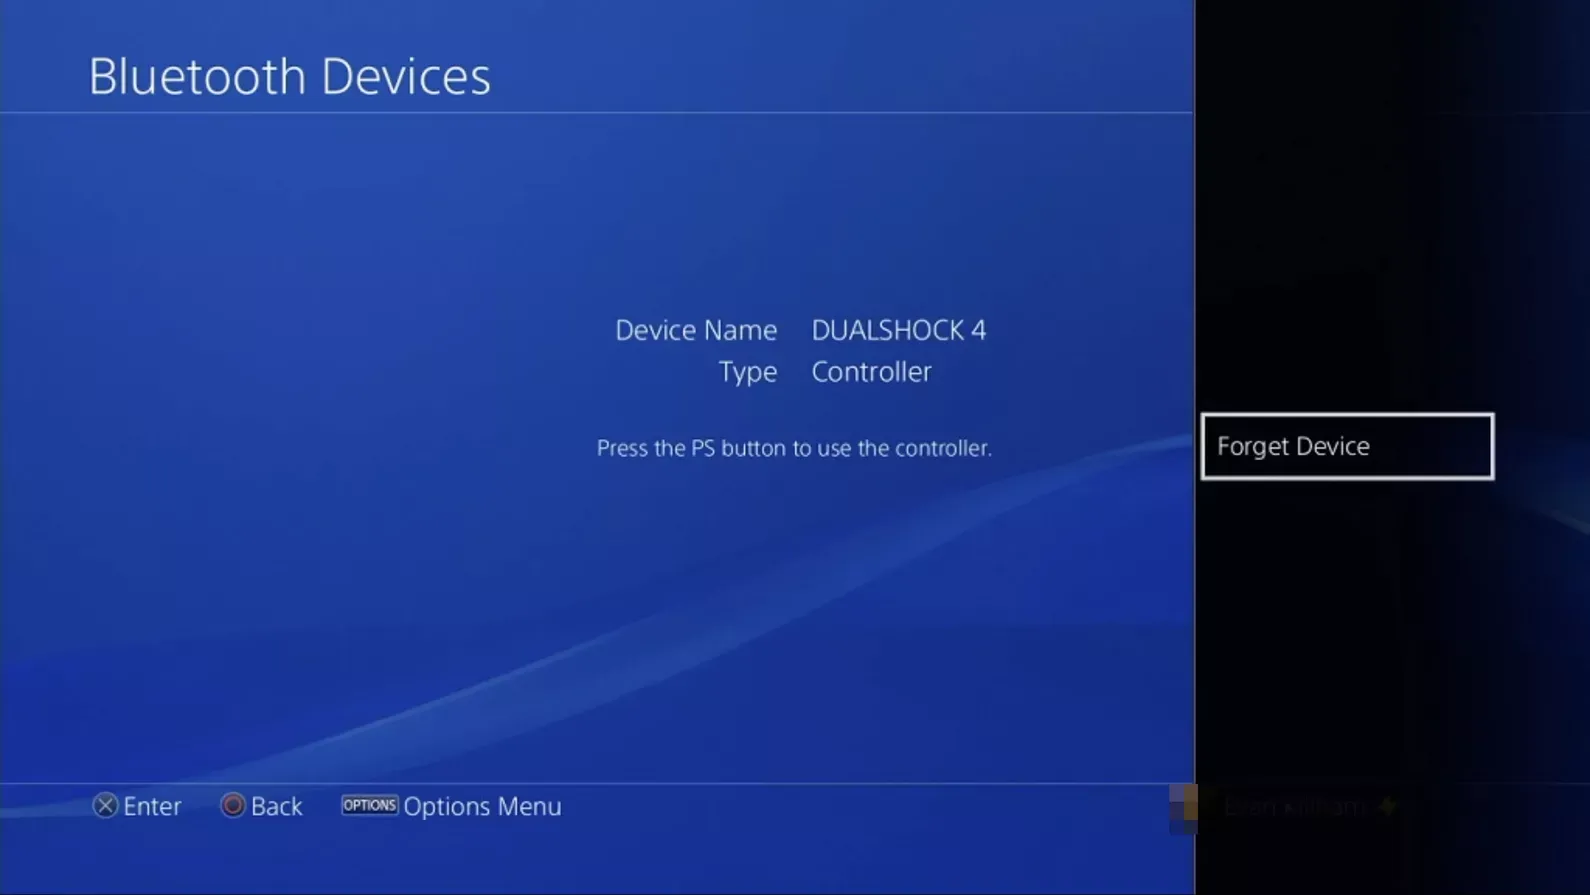 Reset PS4 Controller: Forget Device option in Bluetooth Devices Menu